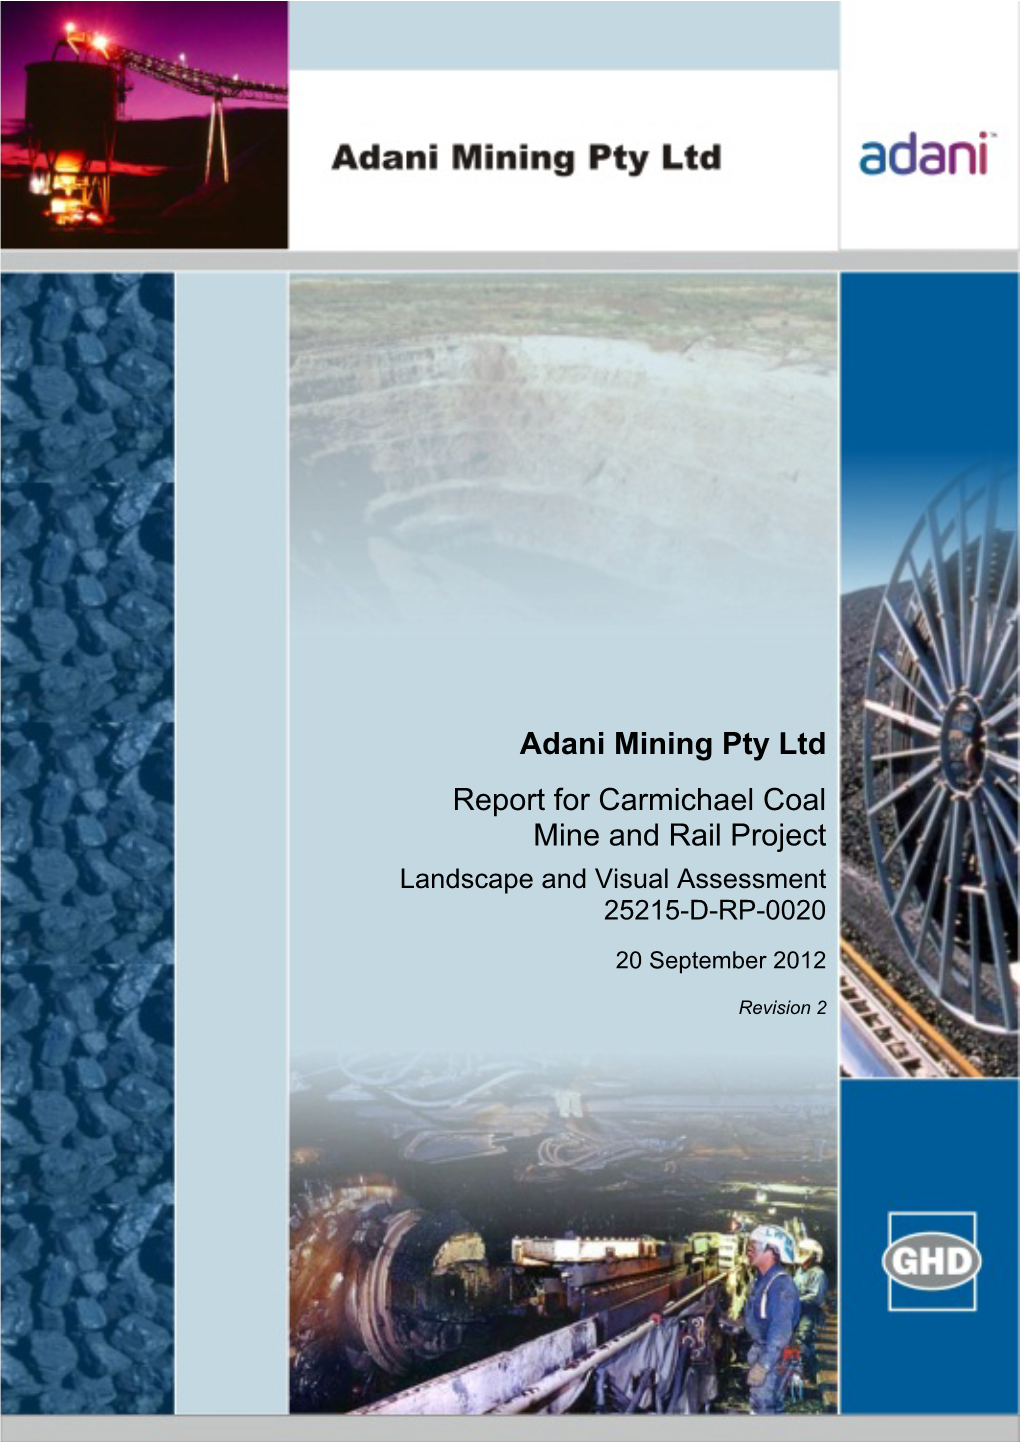 Adani Mining Pty Ltd Report for Carmichael Coal Mine and Rail Project Landscape and Visual Assessment 25215-D-RP-0020